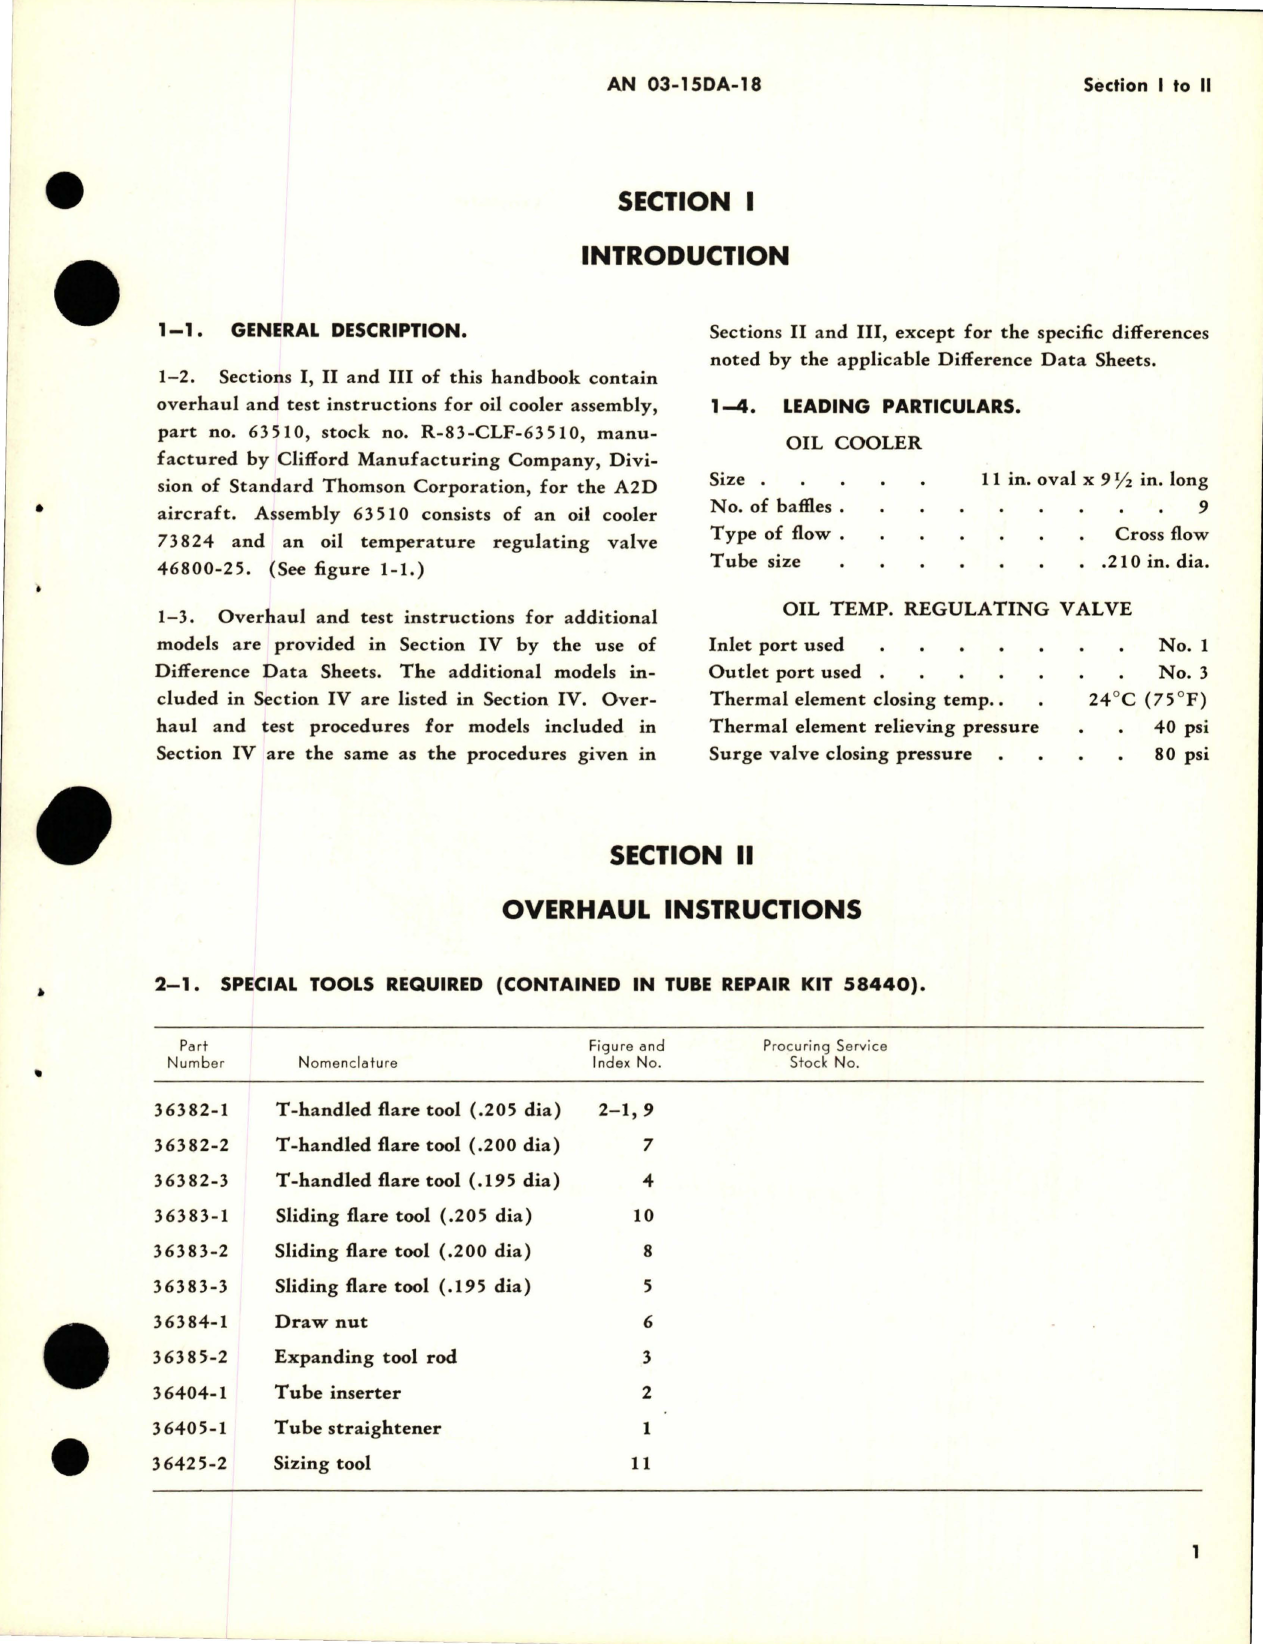 Sample page 5 from AirCorps Library document: Overhaul Instructions for Oil Cooler Assemblies - Parts 63510, 63510-1, and 63510-2